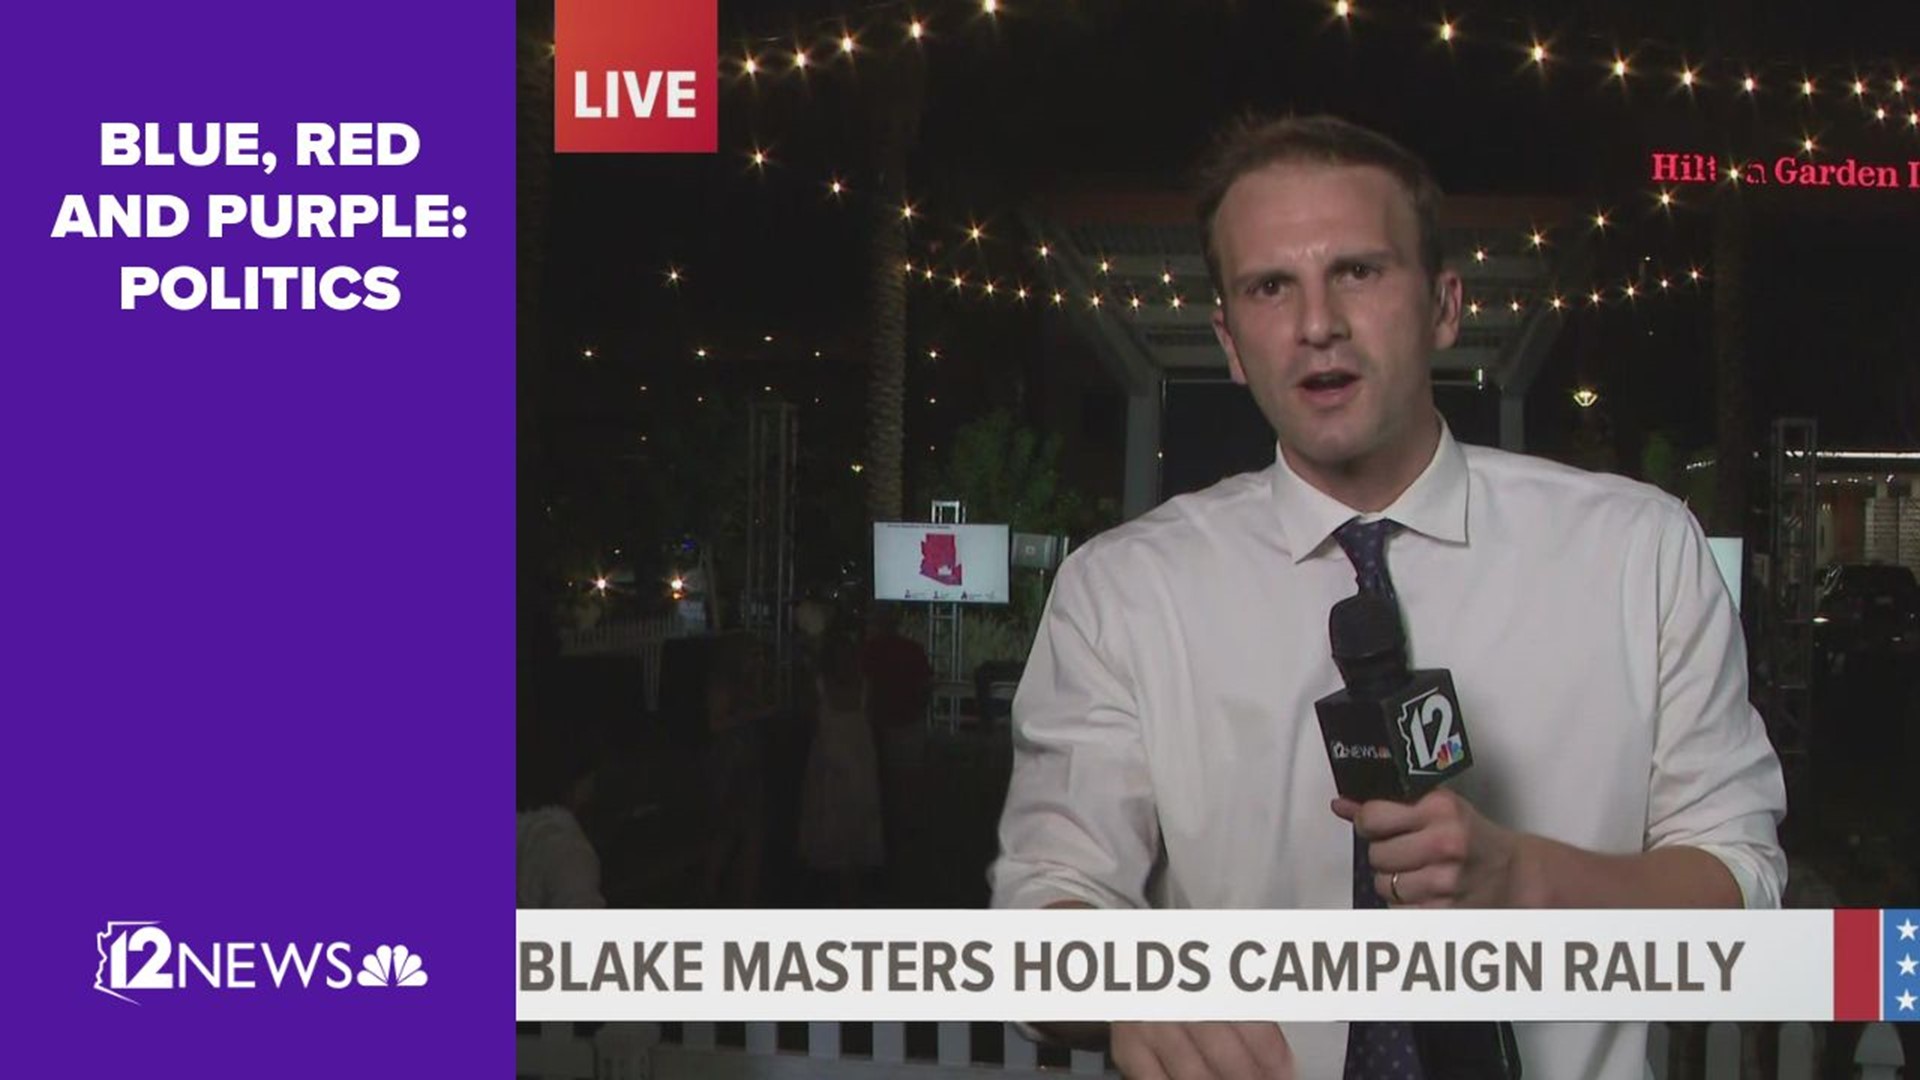 Blake Masters is one of the frontrunners for the Republican nomination to face U.S. Senator Mark Kelly in November.